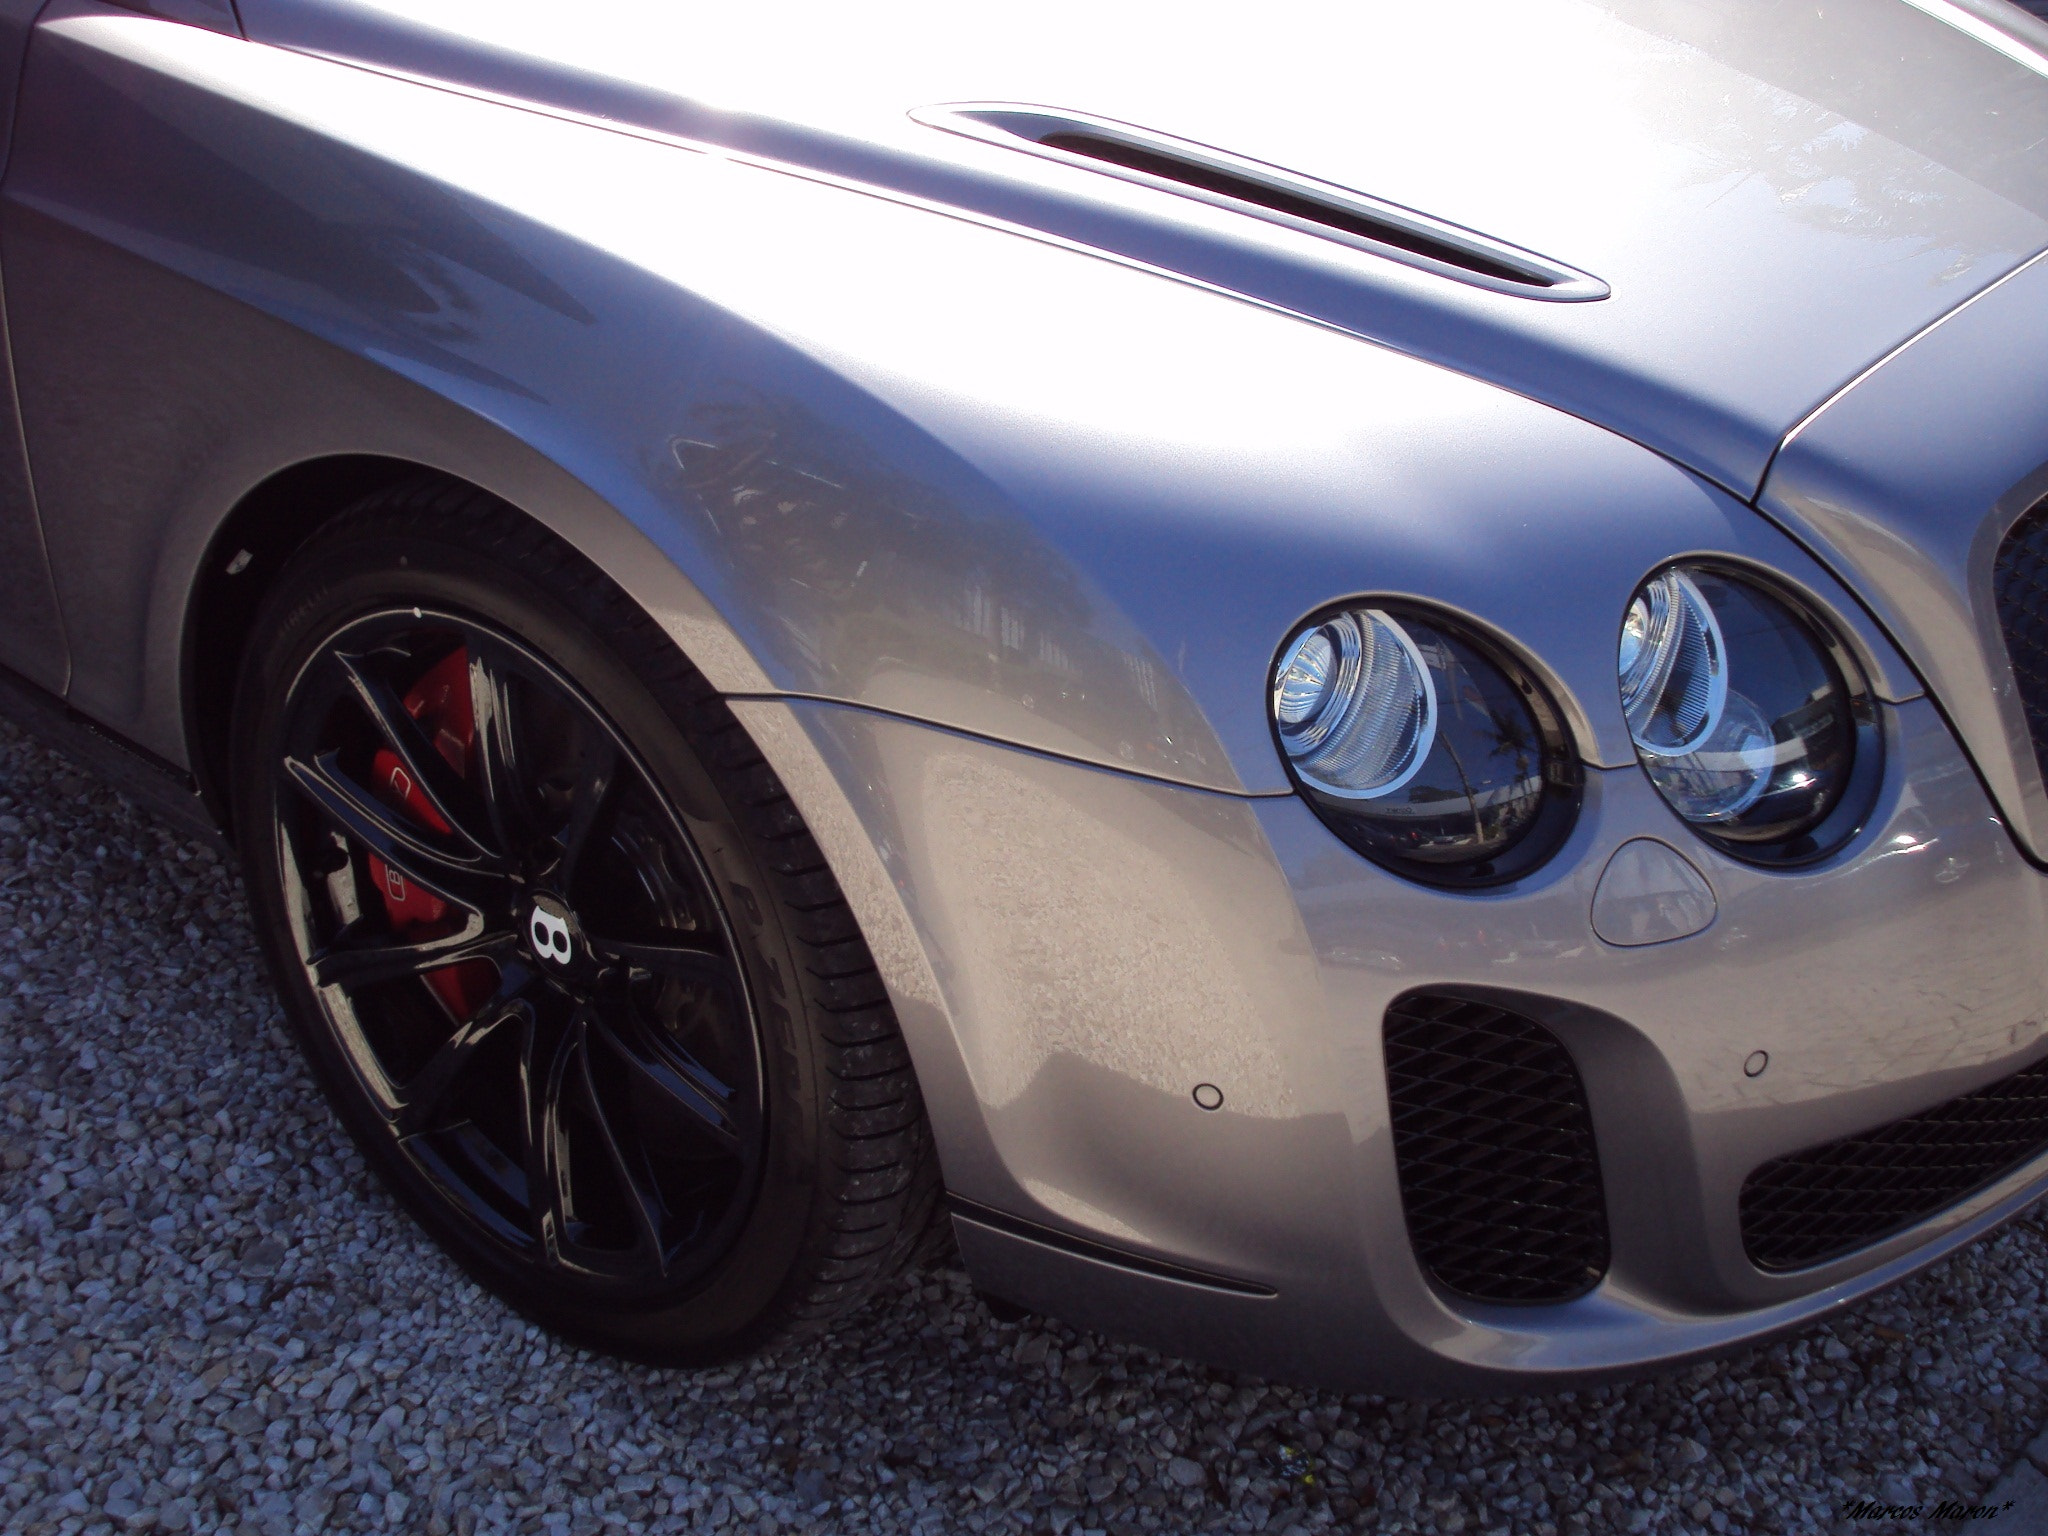 Sony Cyber-shot DSC-S930 sample photo. The amazing bentley supersport photography